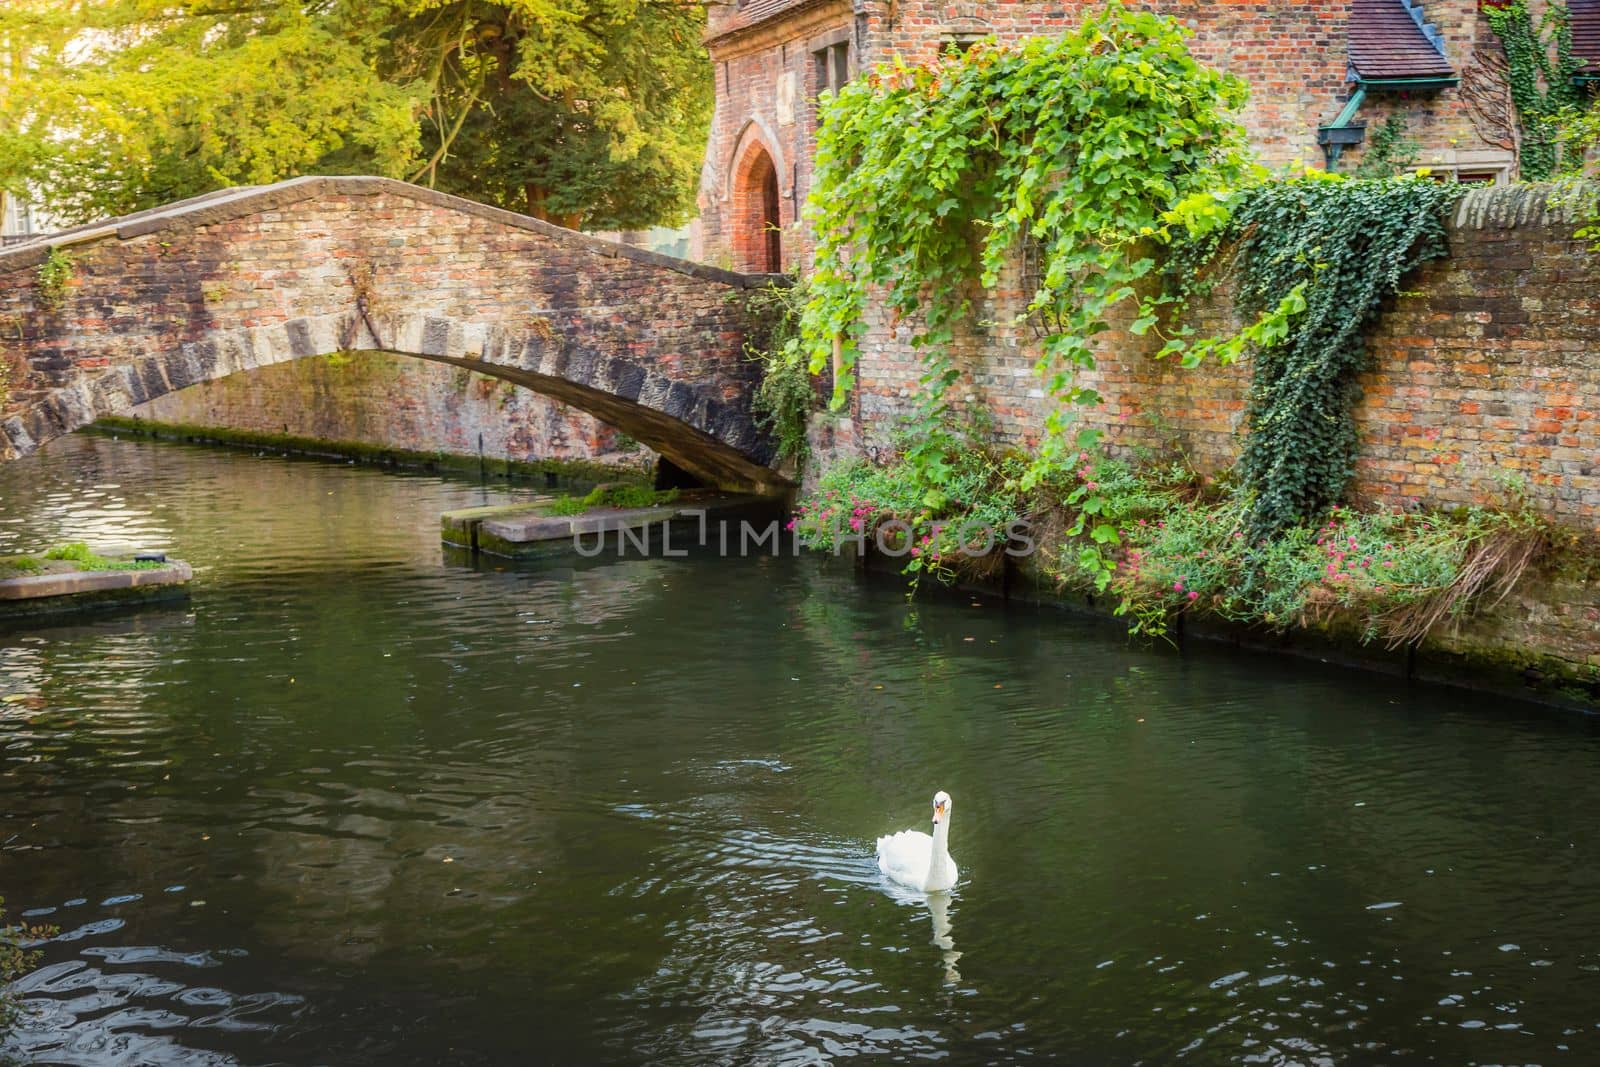 Flemish and ornate architecture of Bruges with canal and swan floating on water, Flanders, Belgium